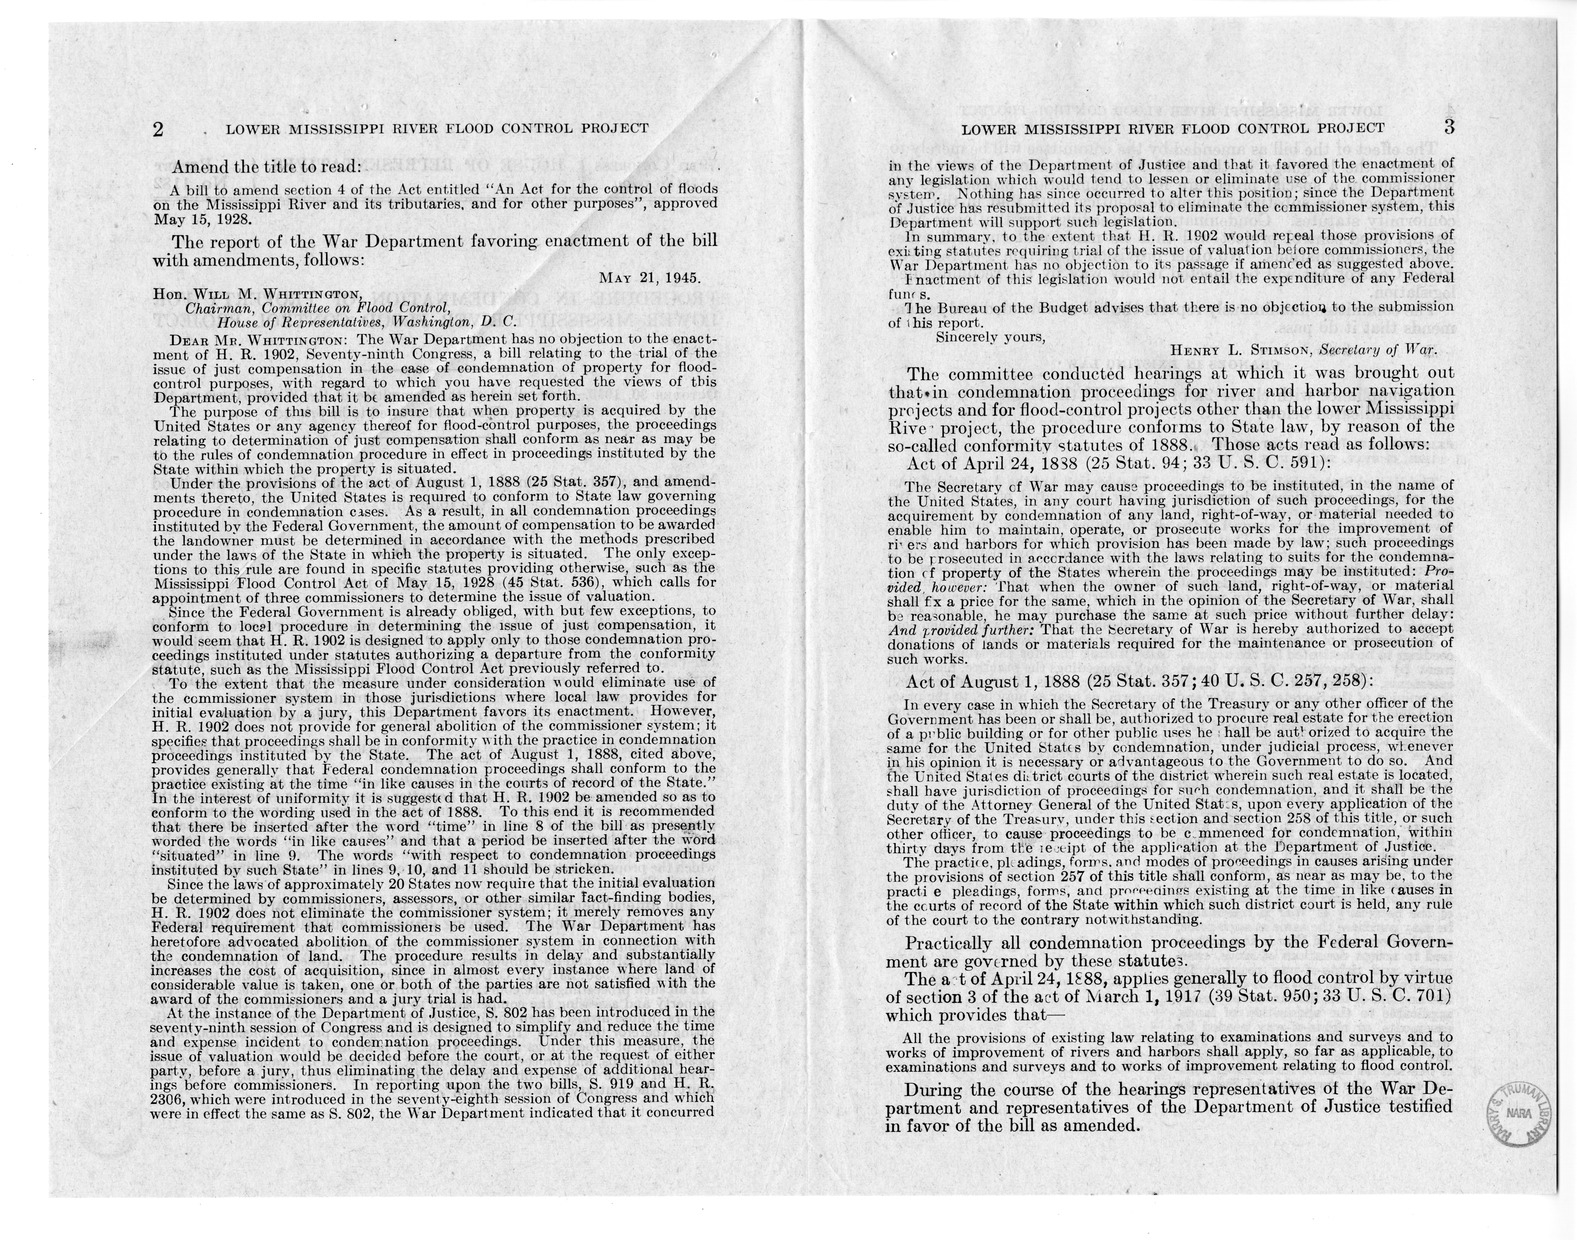 Memorandum from Frederick J. Bailey to M. C. Latta, H.R. 1902, To Amend Section 4 of the Act Entitled 'An Act for the Control of Floods on the Mississippi River and Its Tributaries and for Other Purposes', Approved May 15, 1928, with Attachments